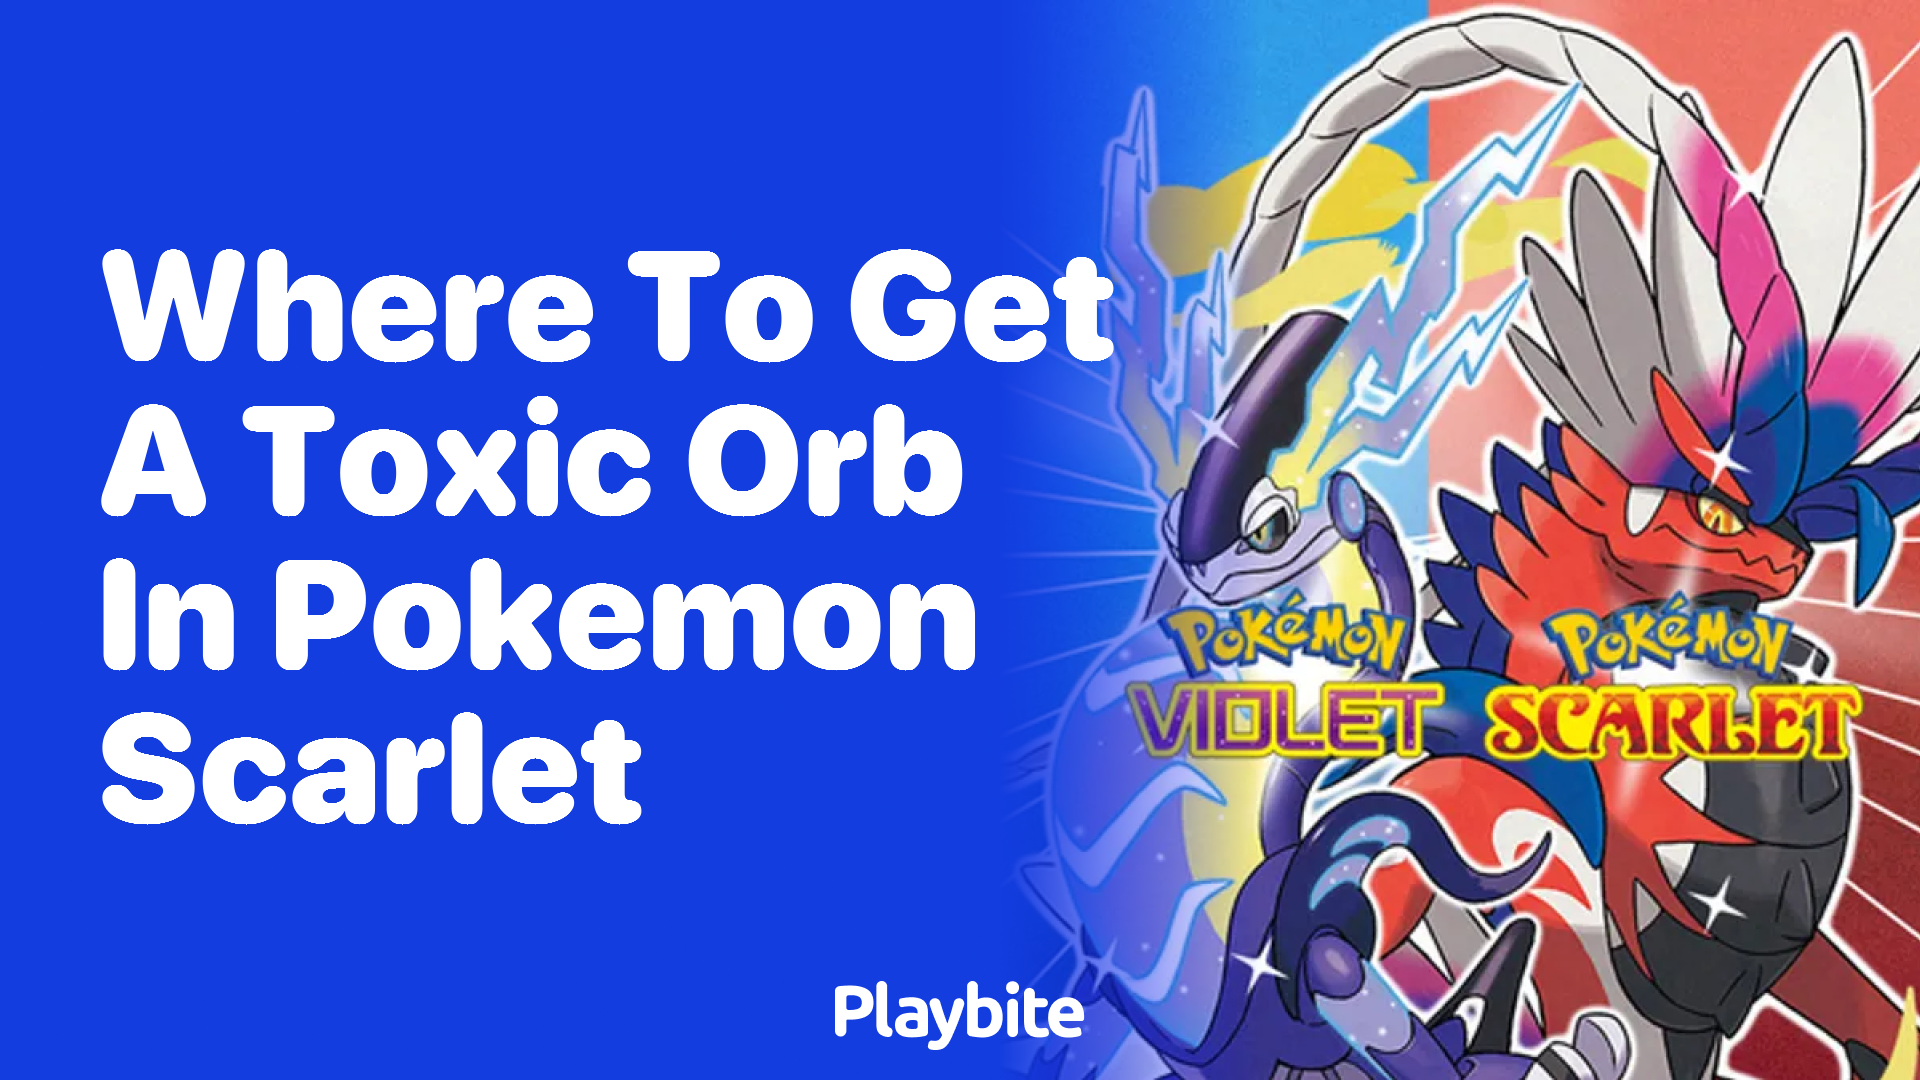 Where to get a Toxic Orb in Pokemon Scarlet